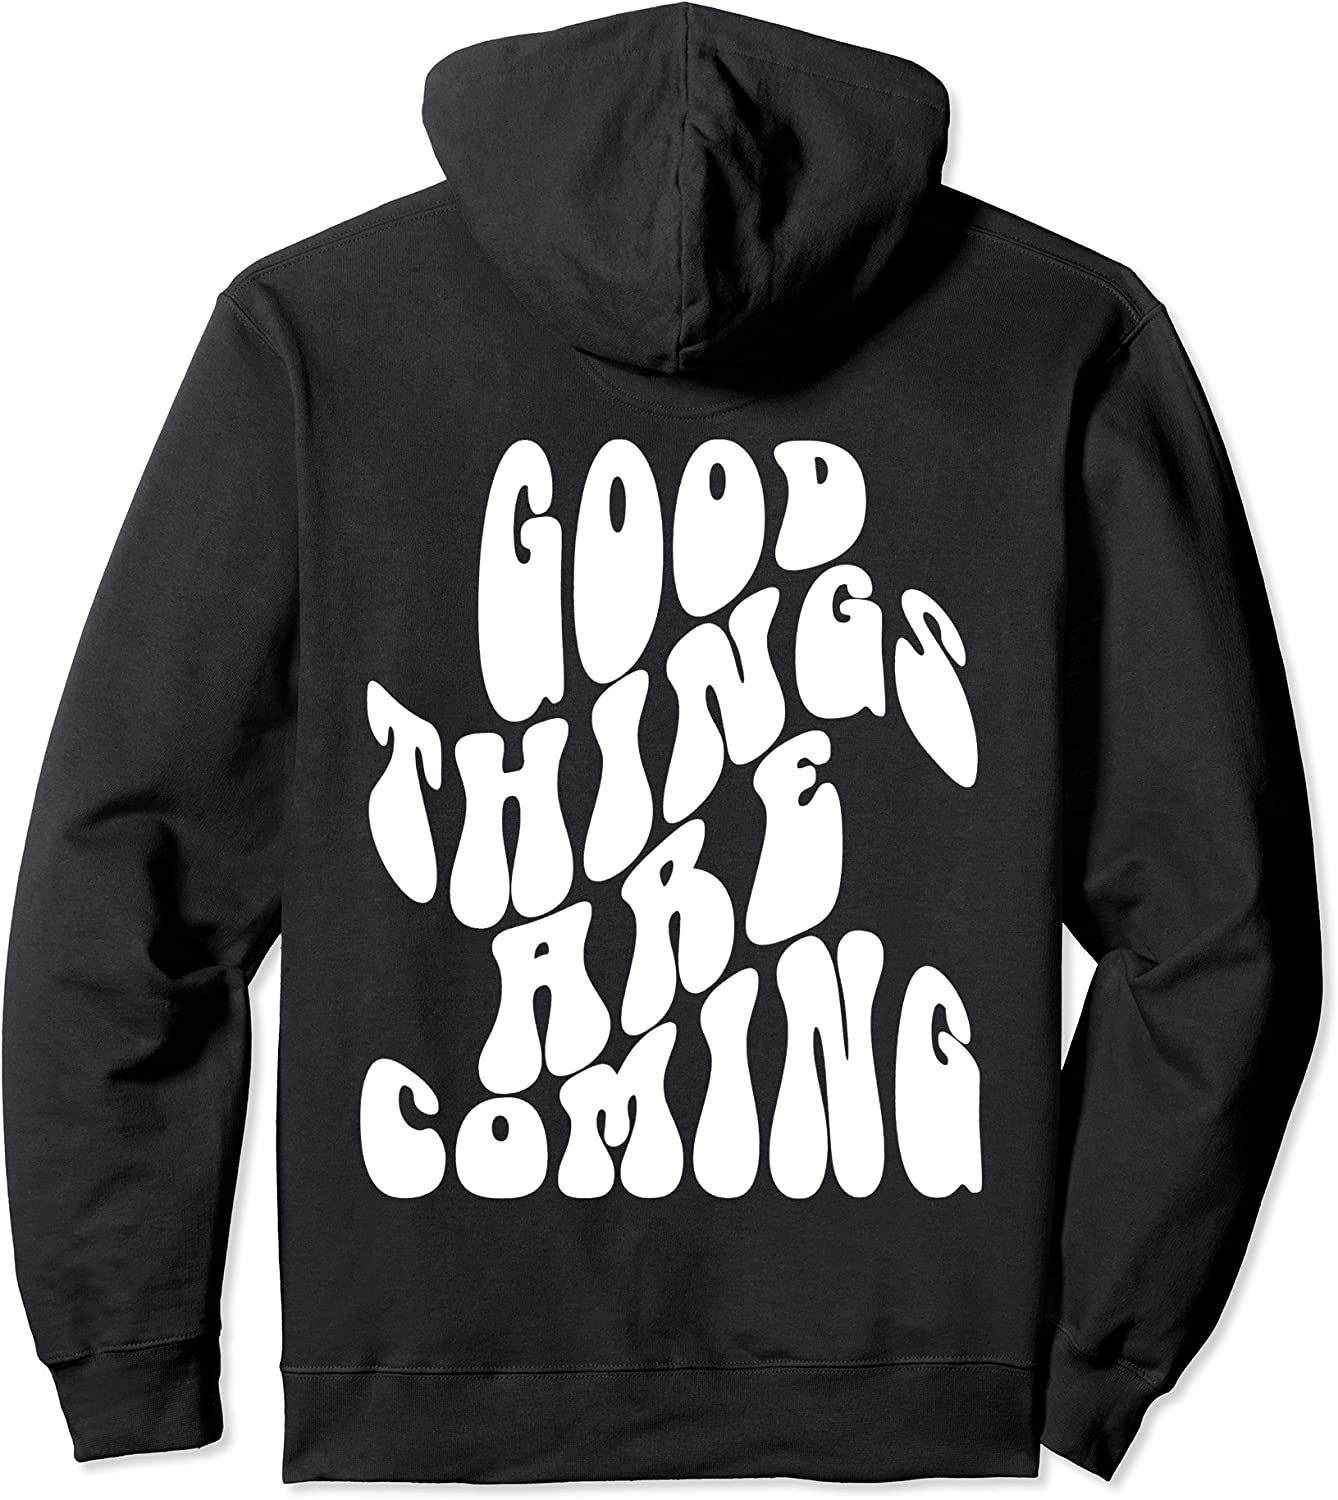 Good Things Are Coming - Positive Quote Trendy Costume Pullover Hoodie | Amazon (US)